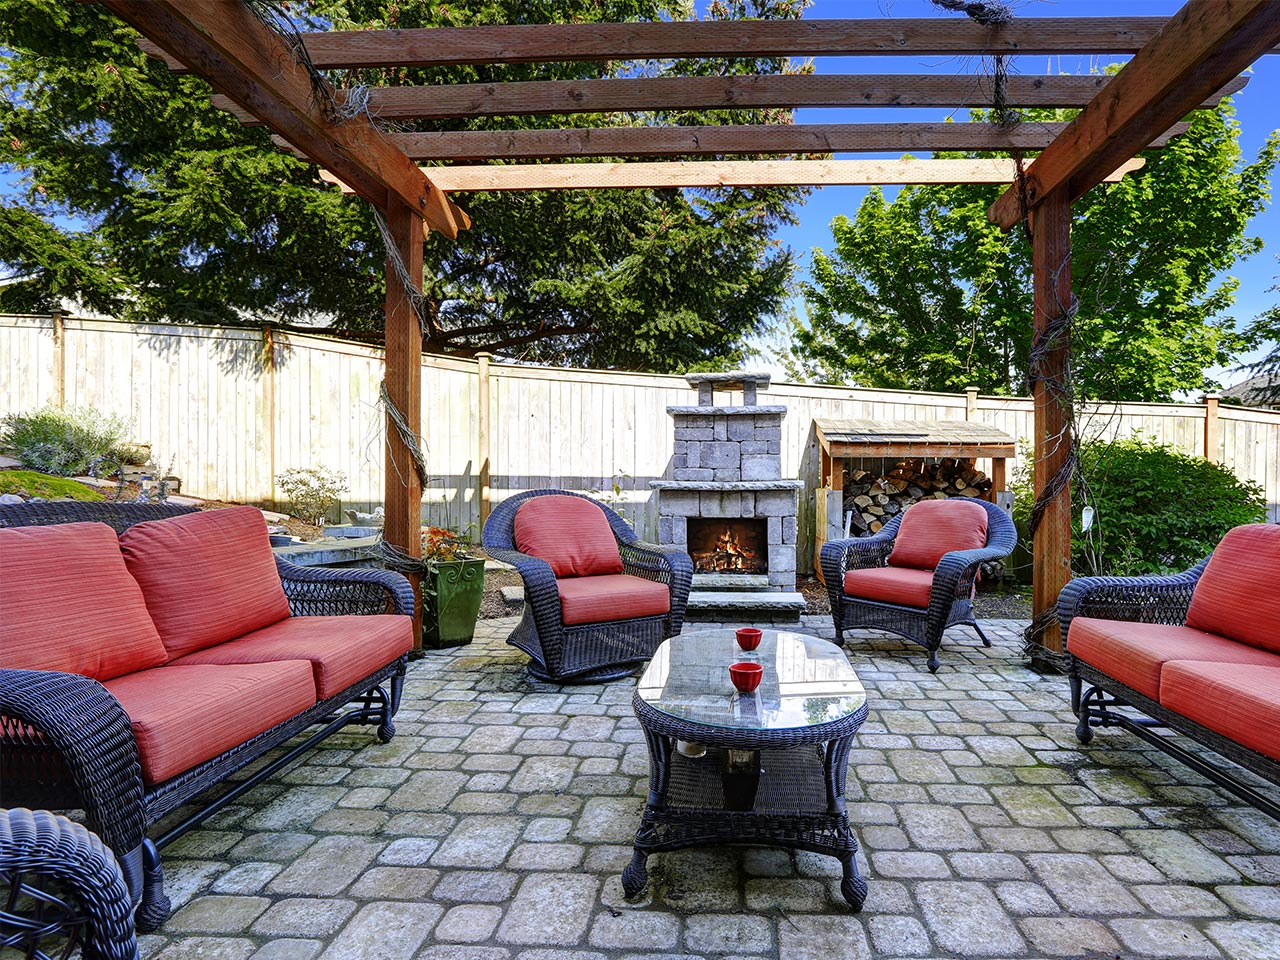 Patio with chairs and barbecue